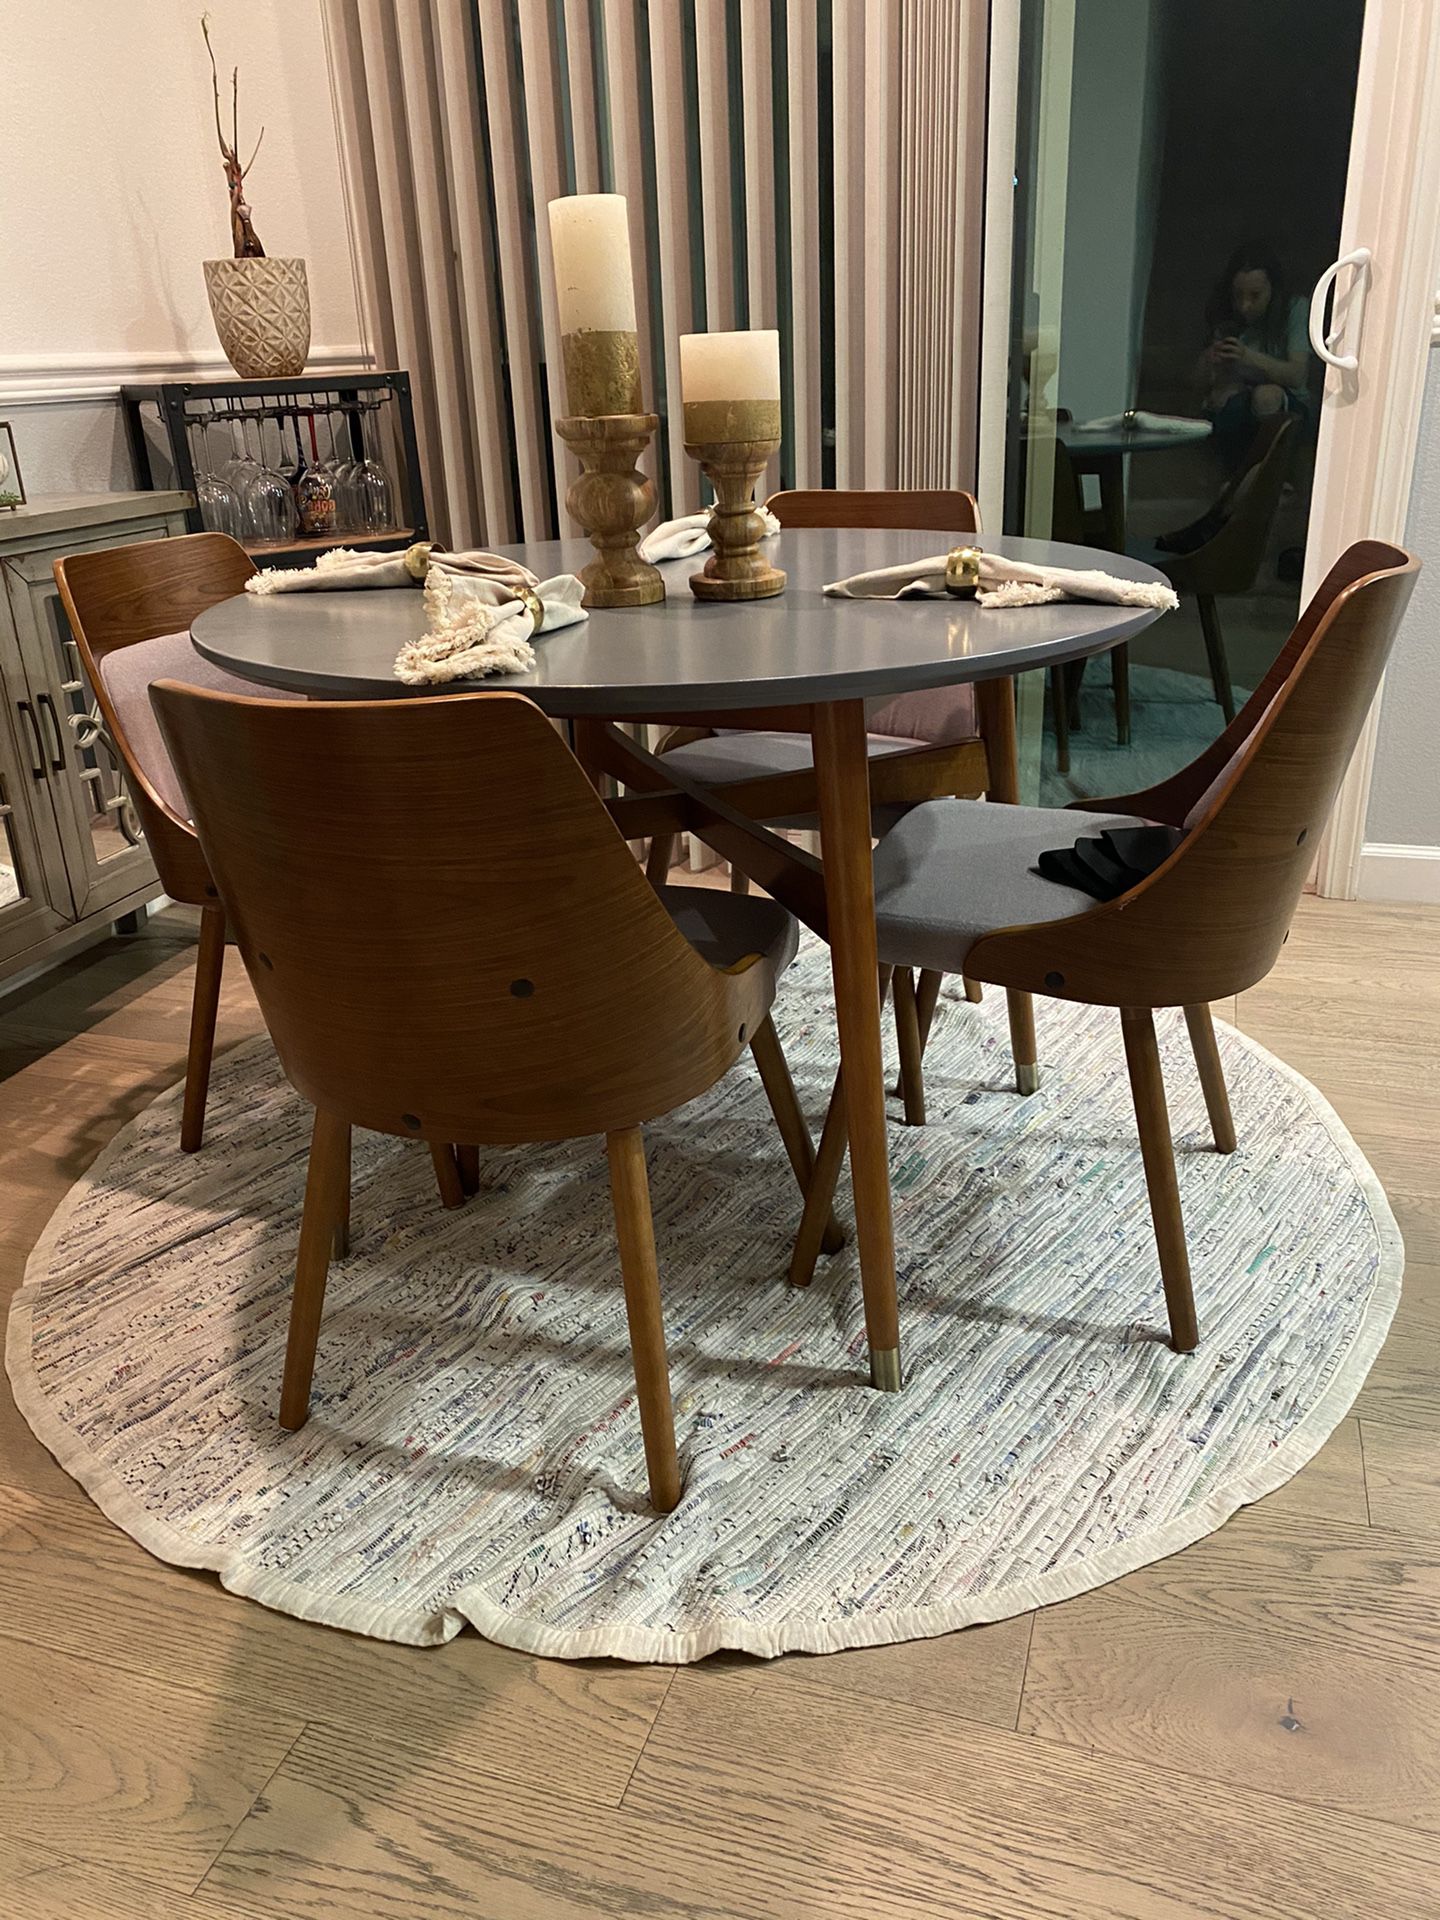 5 Piece Dining Table + Rug